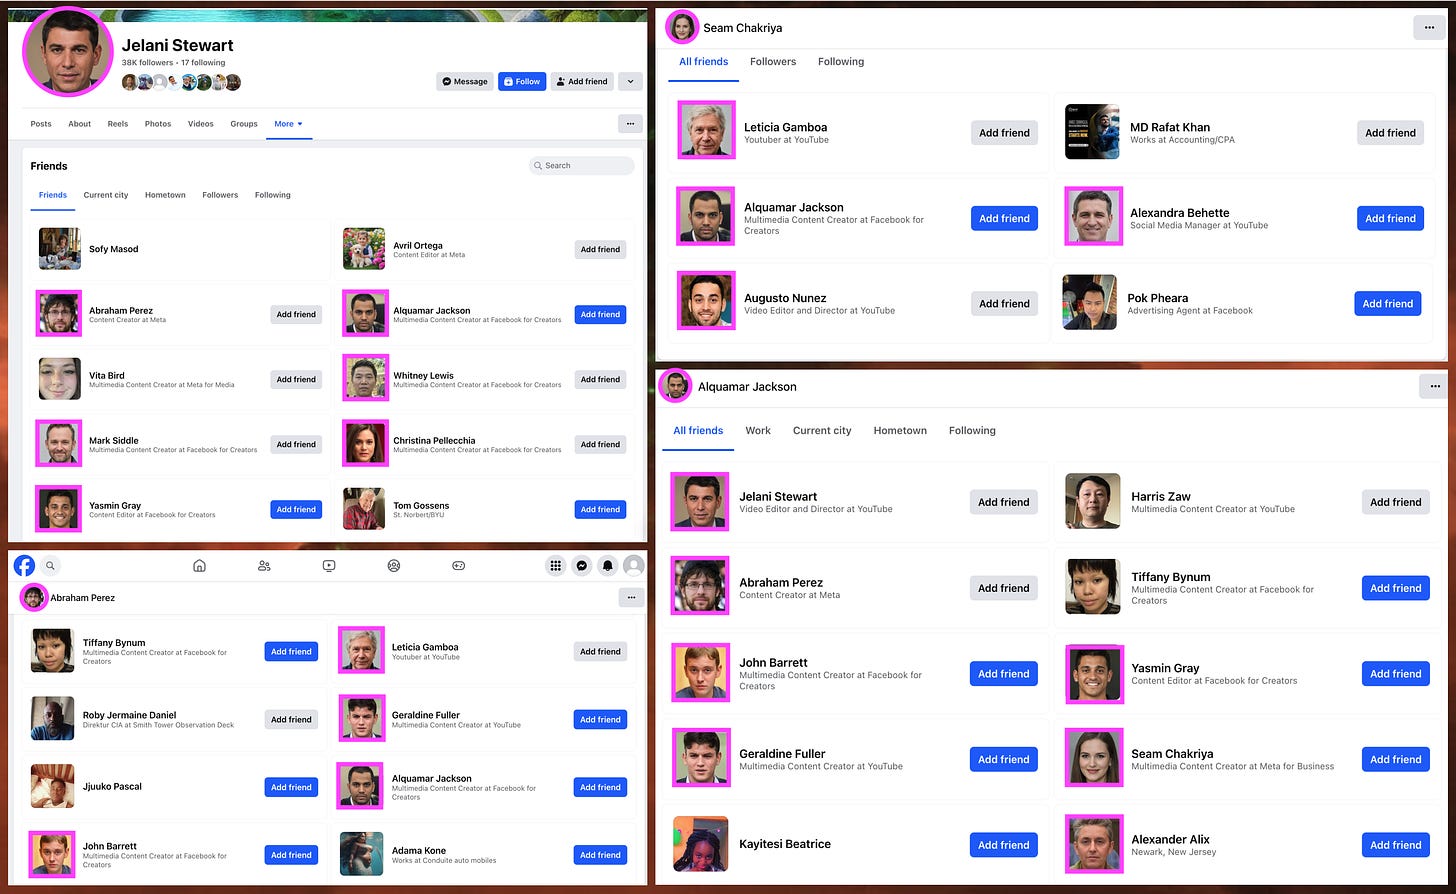 Screenshots of the friends/follow lists of several of the accounts with GAN-generated faces. These lists include additional accounts with GAN-generated faces.